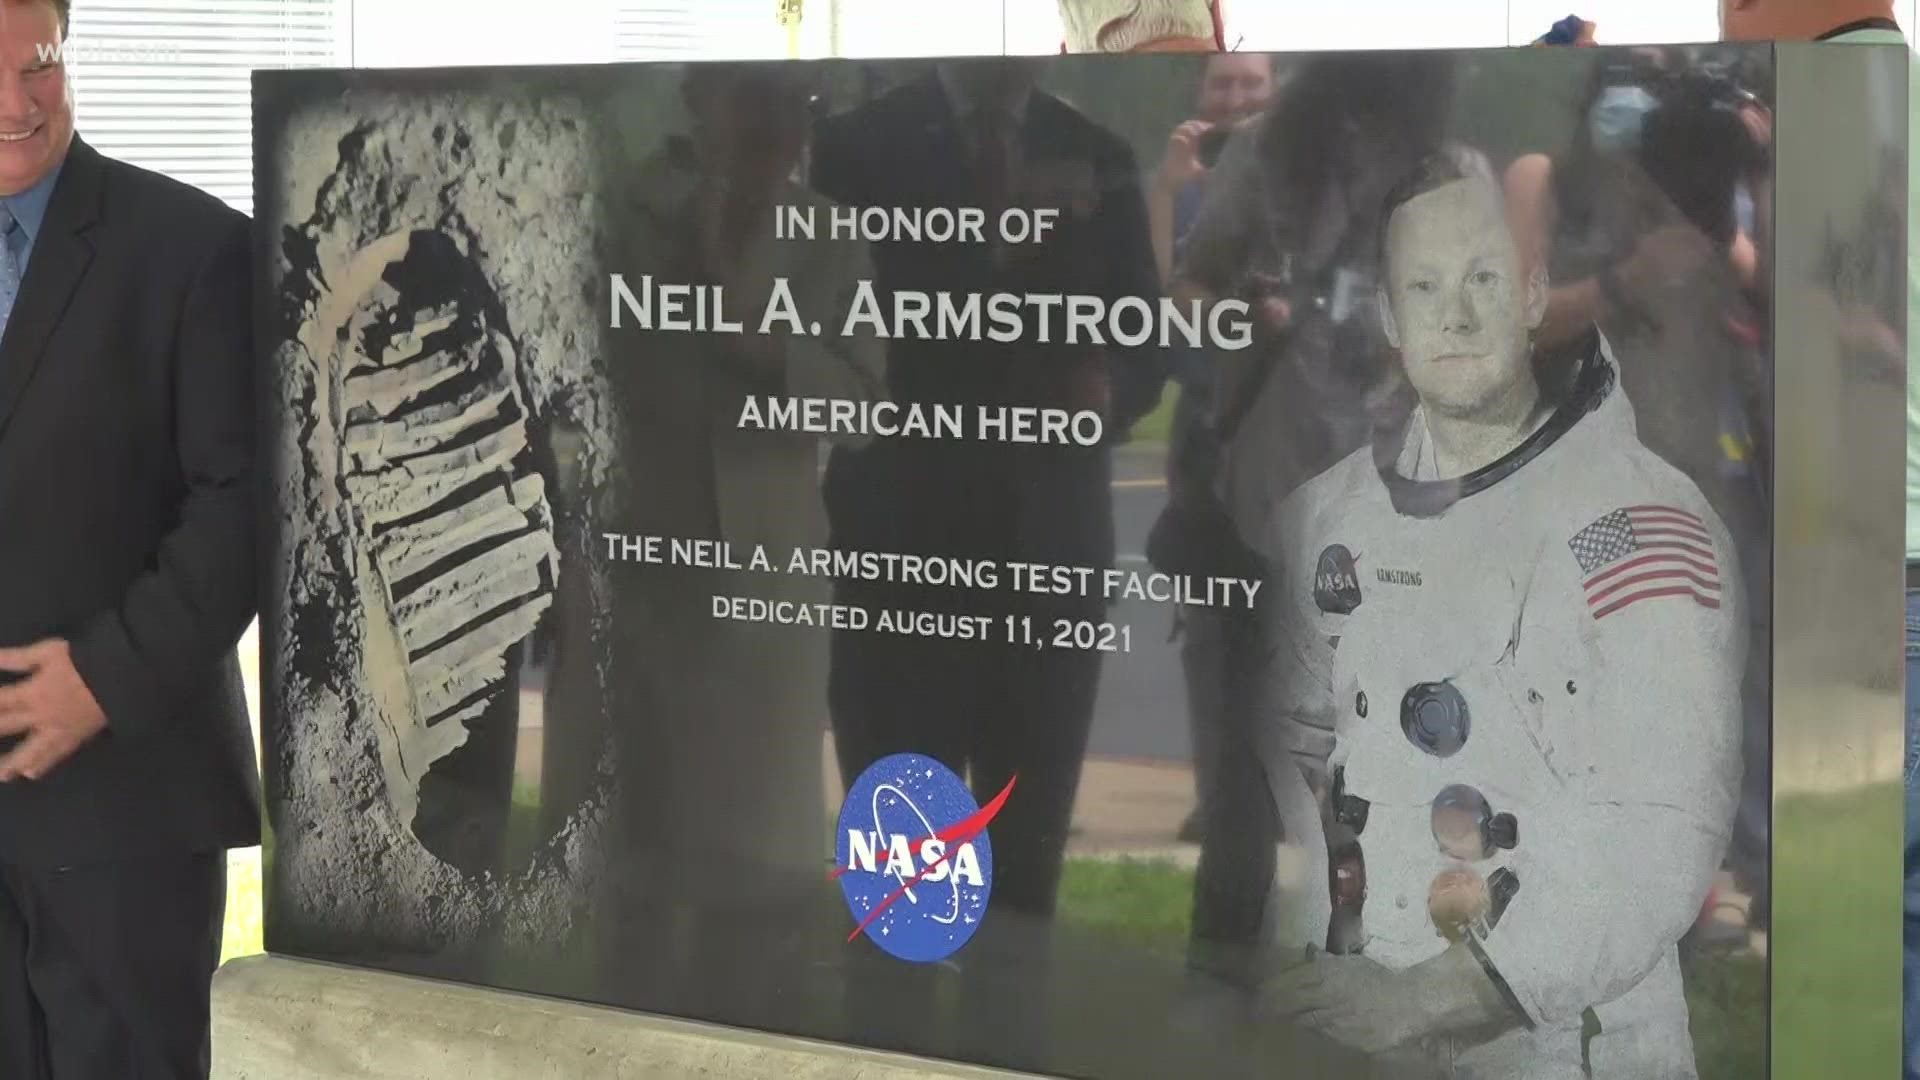 The rededication comes 1 week after what would have been the 91st birthday of the first person to walk on the moon.